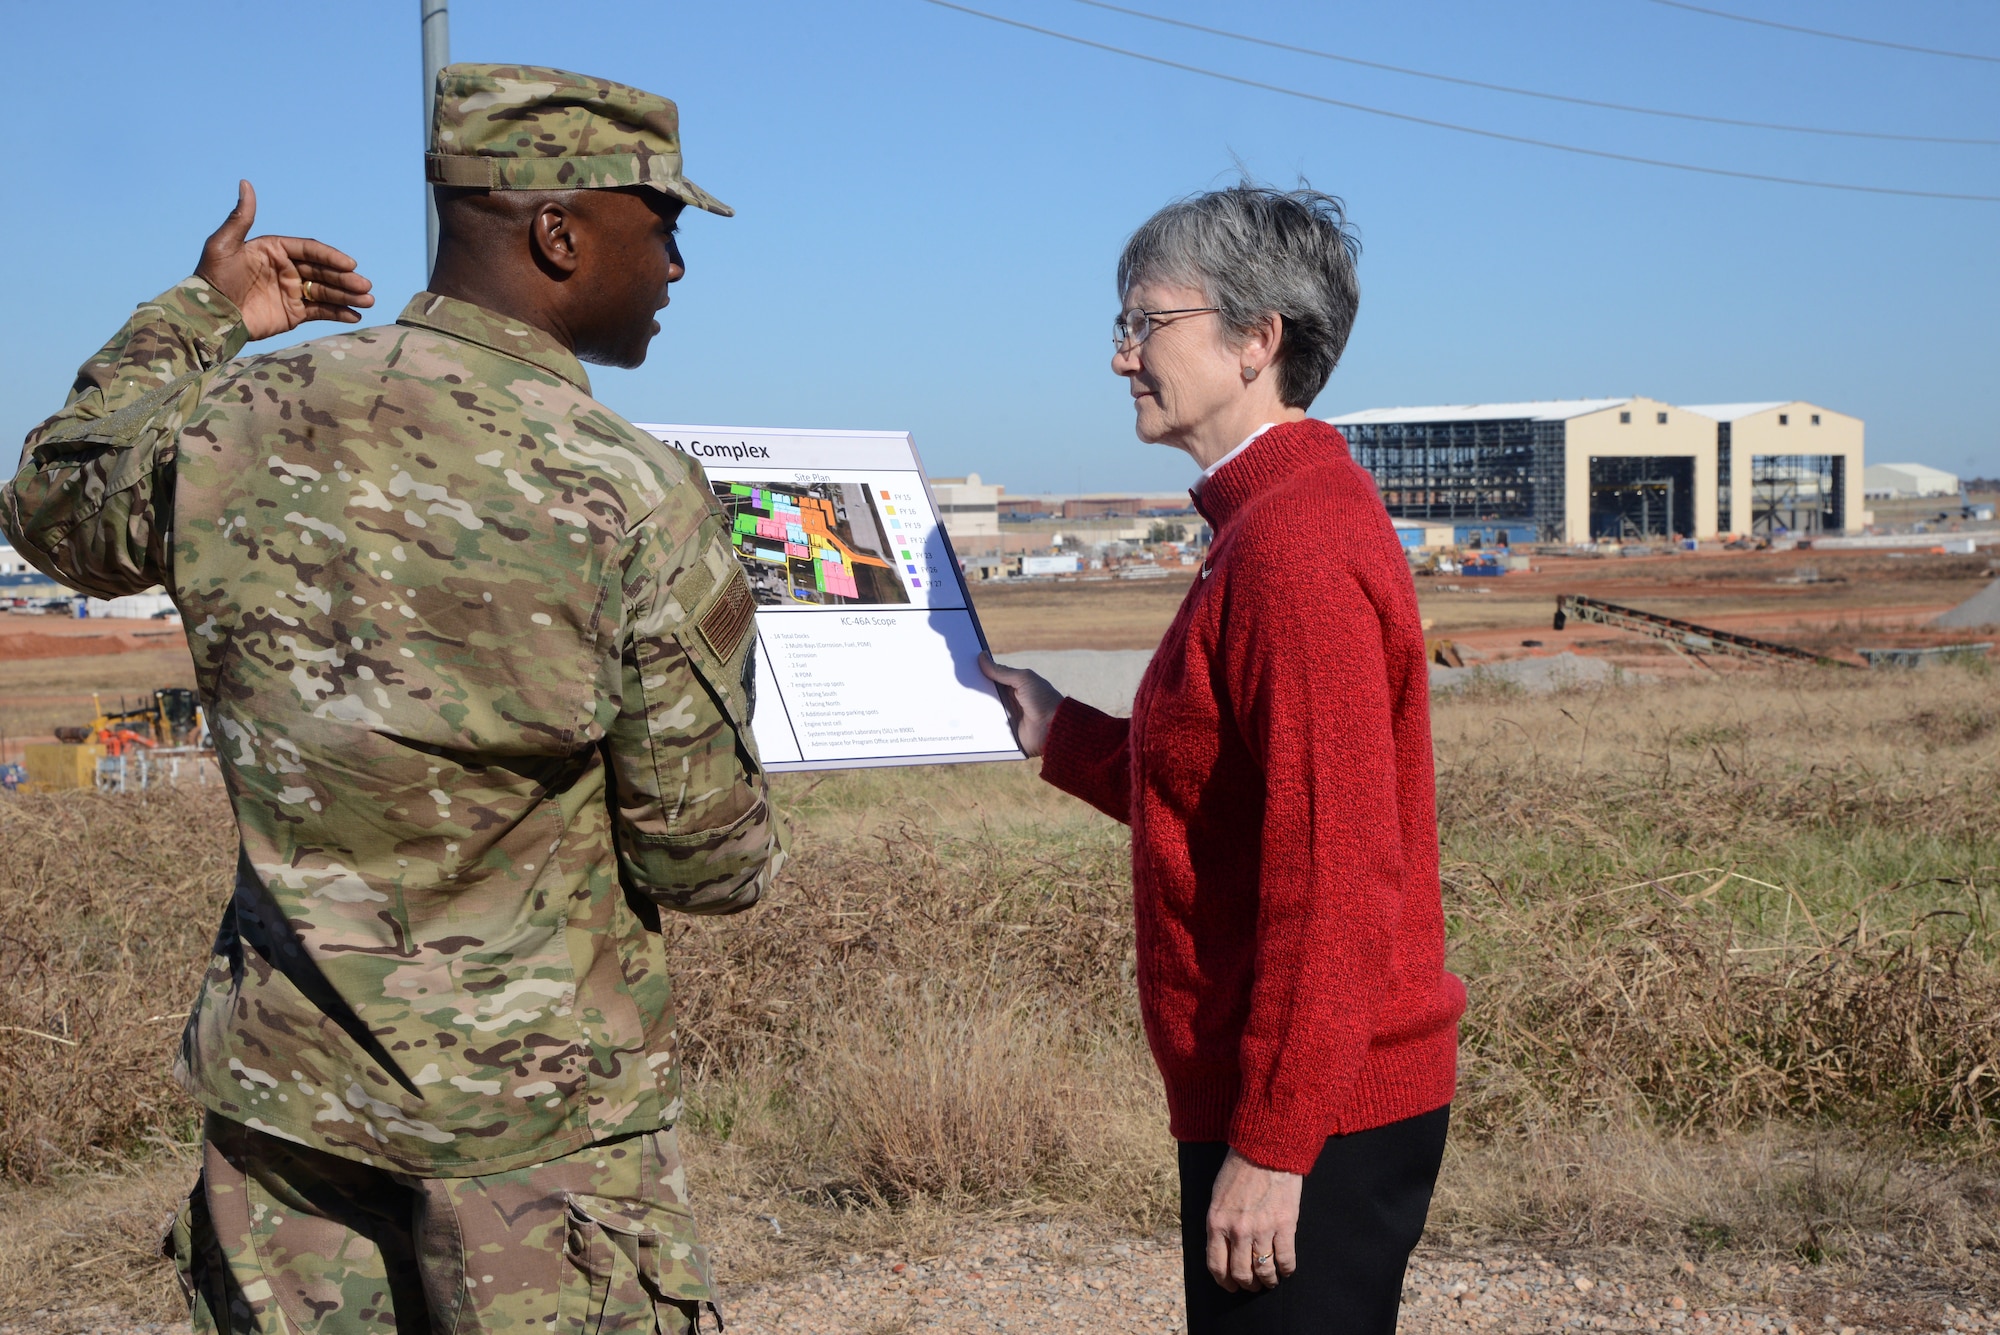 Col. Kenyon Bell, 72nd Air Base Wing commander, gives Secretary of the Air Force Heather Wilson, an overview of the KC-46A program and its maintenance campus under construction in the background during her visit to Tinker Air Force Base Nov. 16. This is Wilson’s first visit to Tinker since becoming secretary.